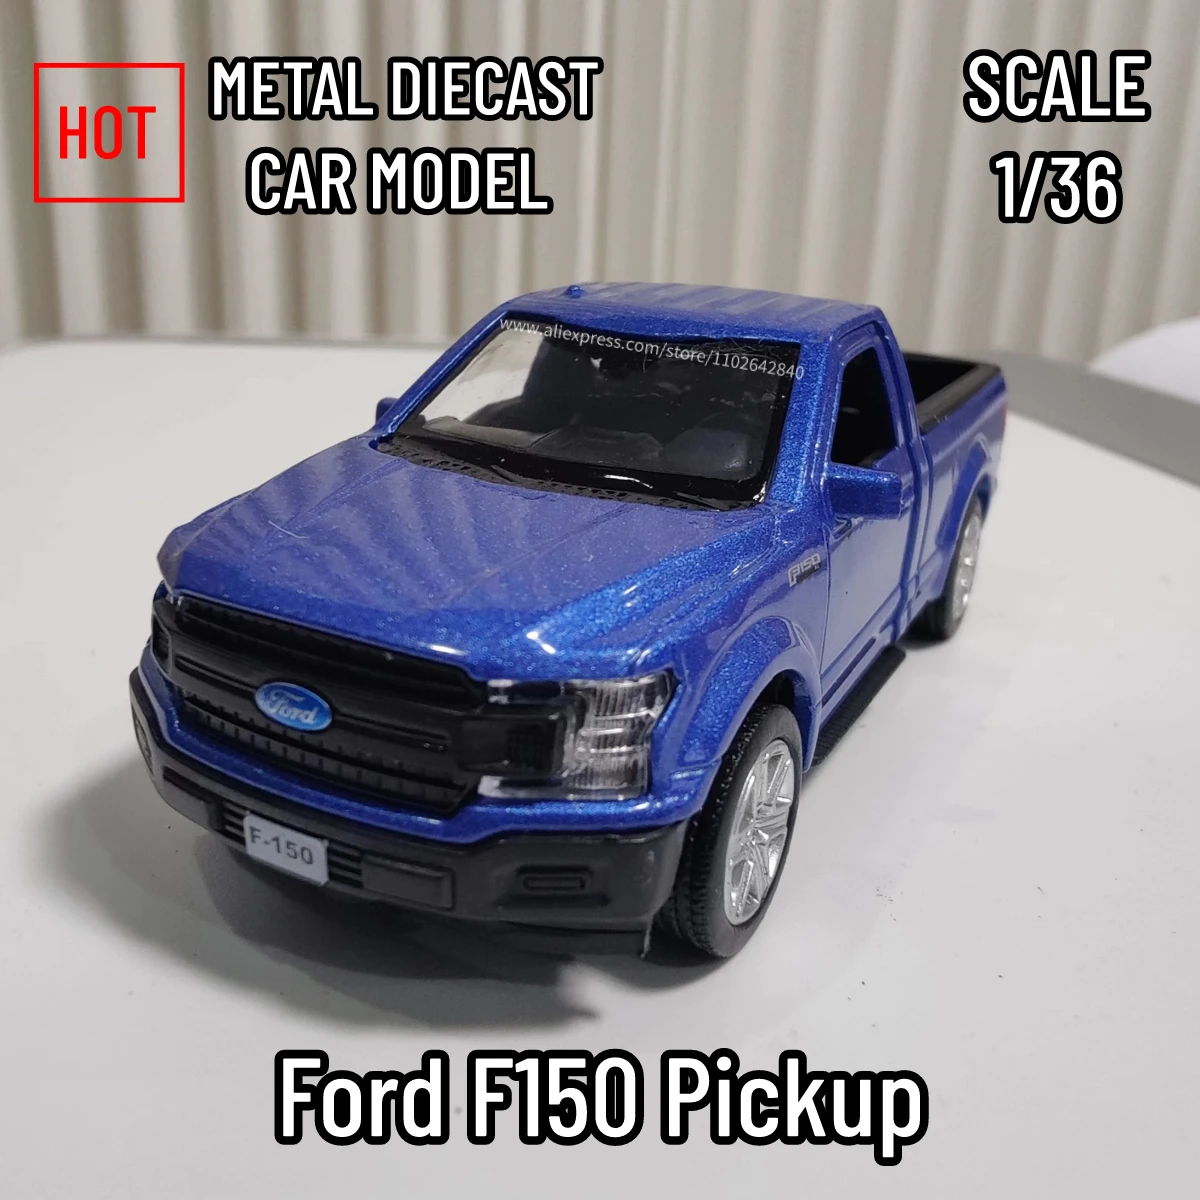 1/36 Scale Ford F150 Pickup Truck Car Model Replica Diecast Collection Vehicle Interior Decor Ornament Xmas Gift Kid Boy Toy no box jada 1 24 scale 1979 ford f 150 f150 pickup model car diecasts